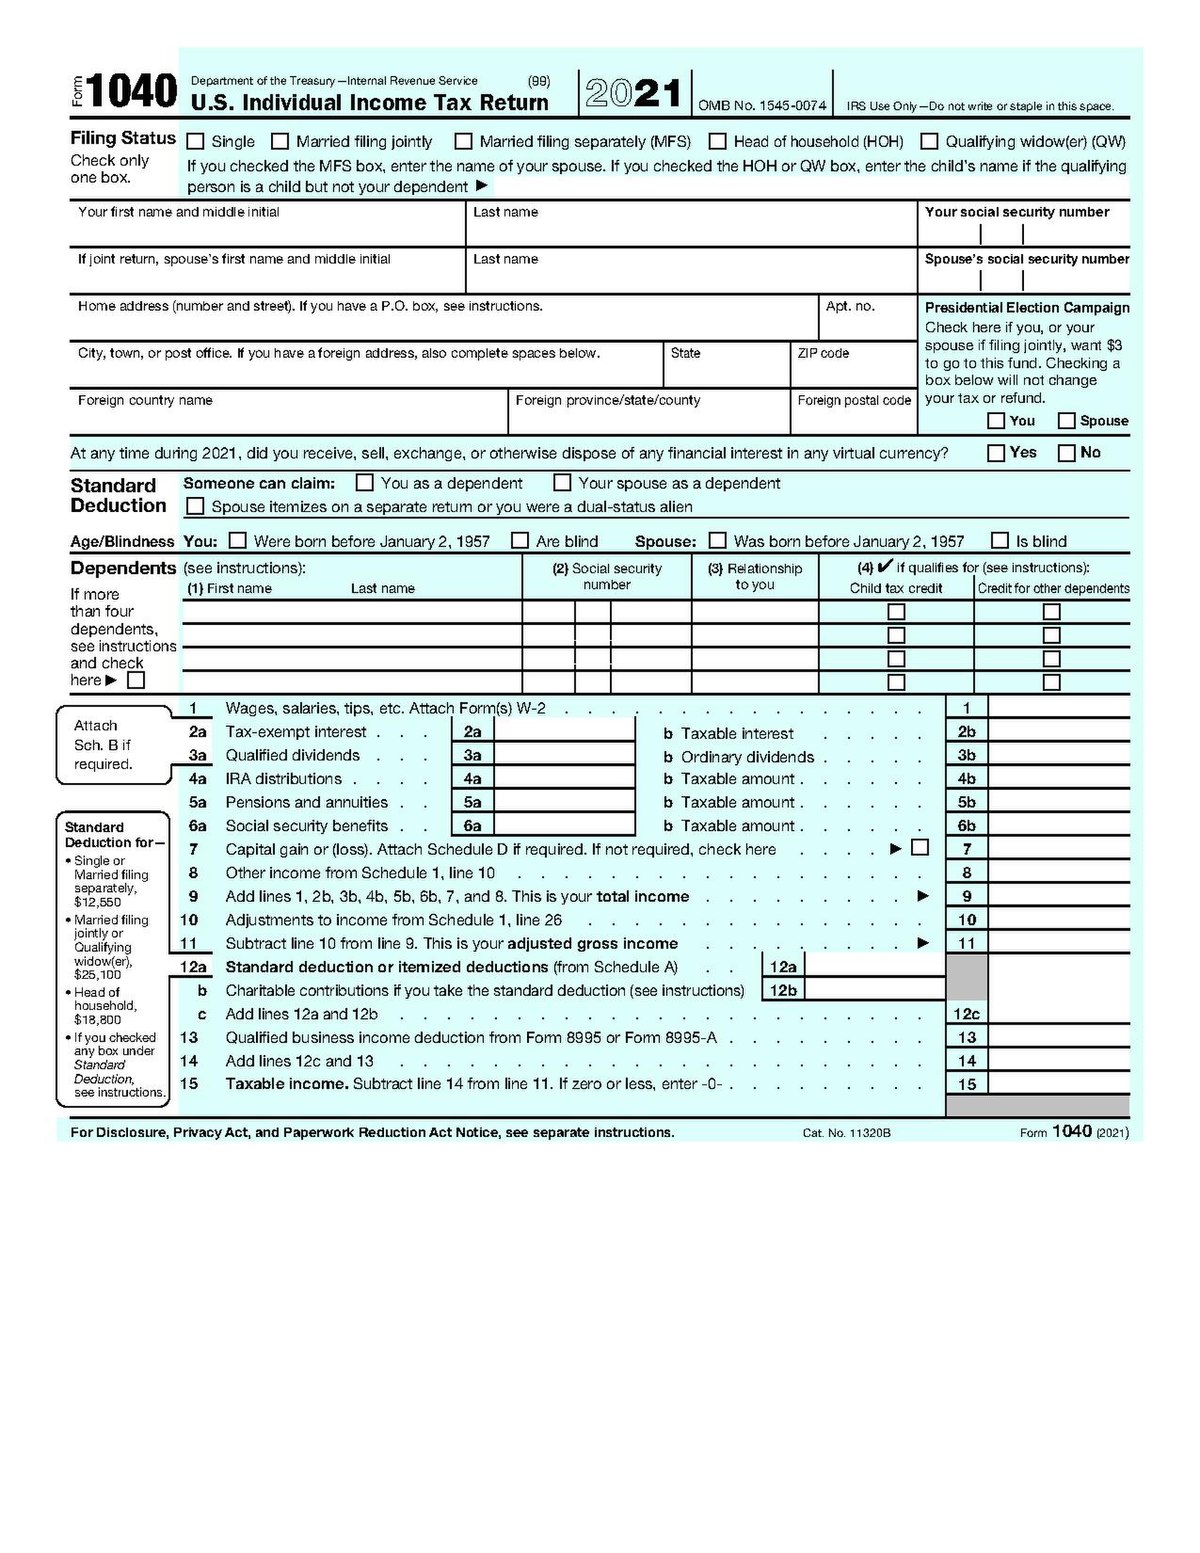 IRS tax forms and publications